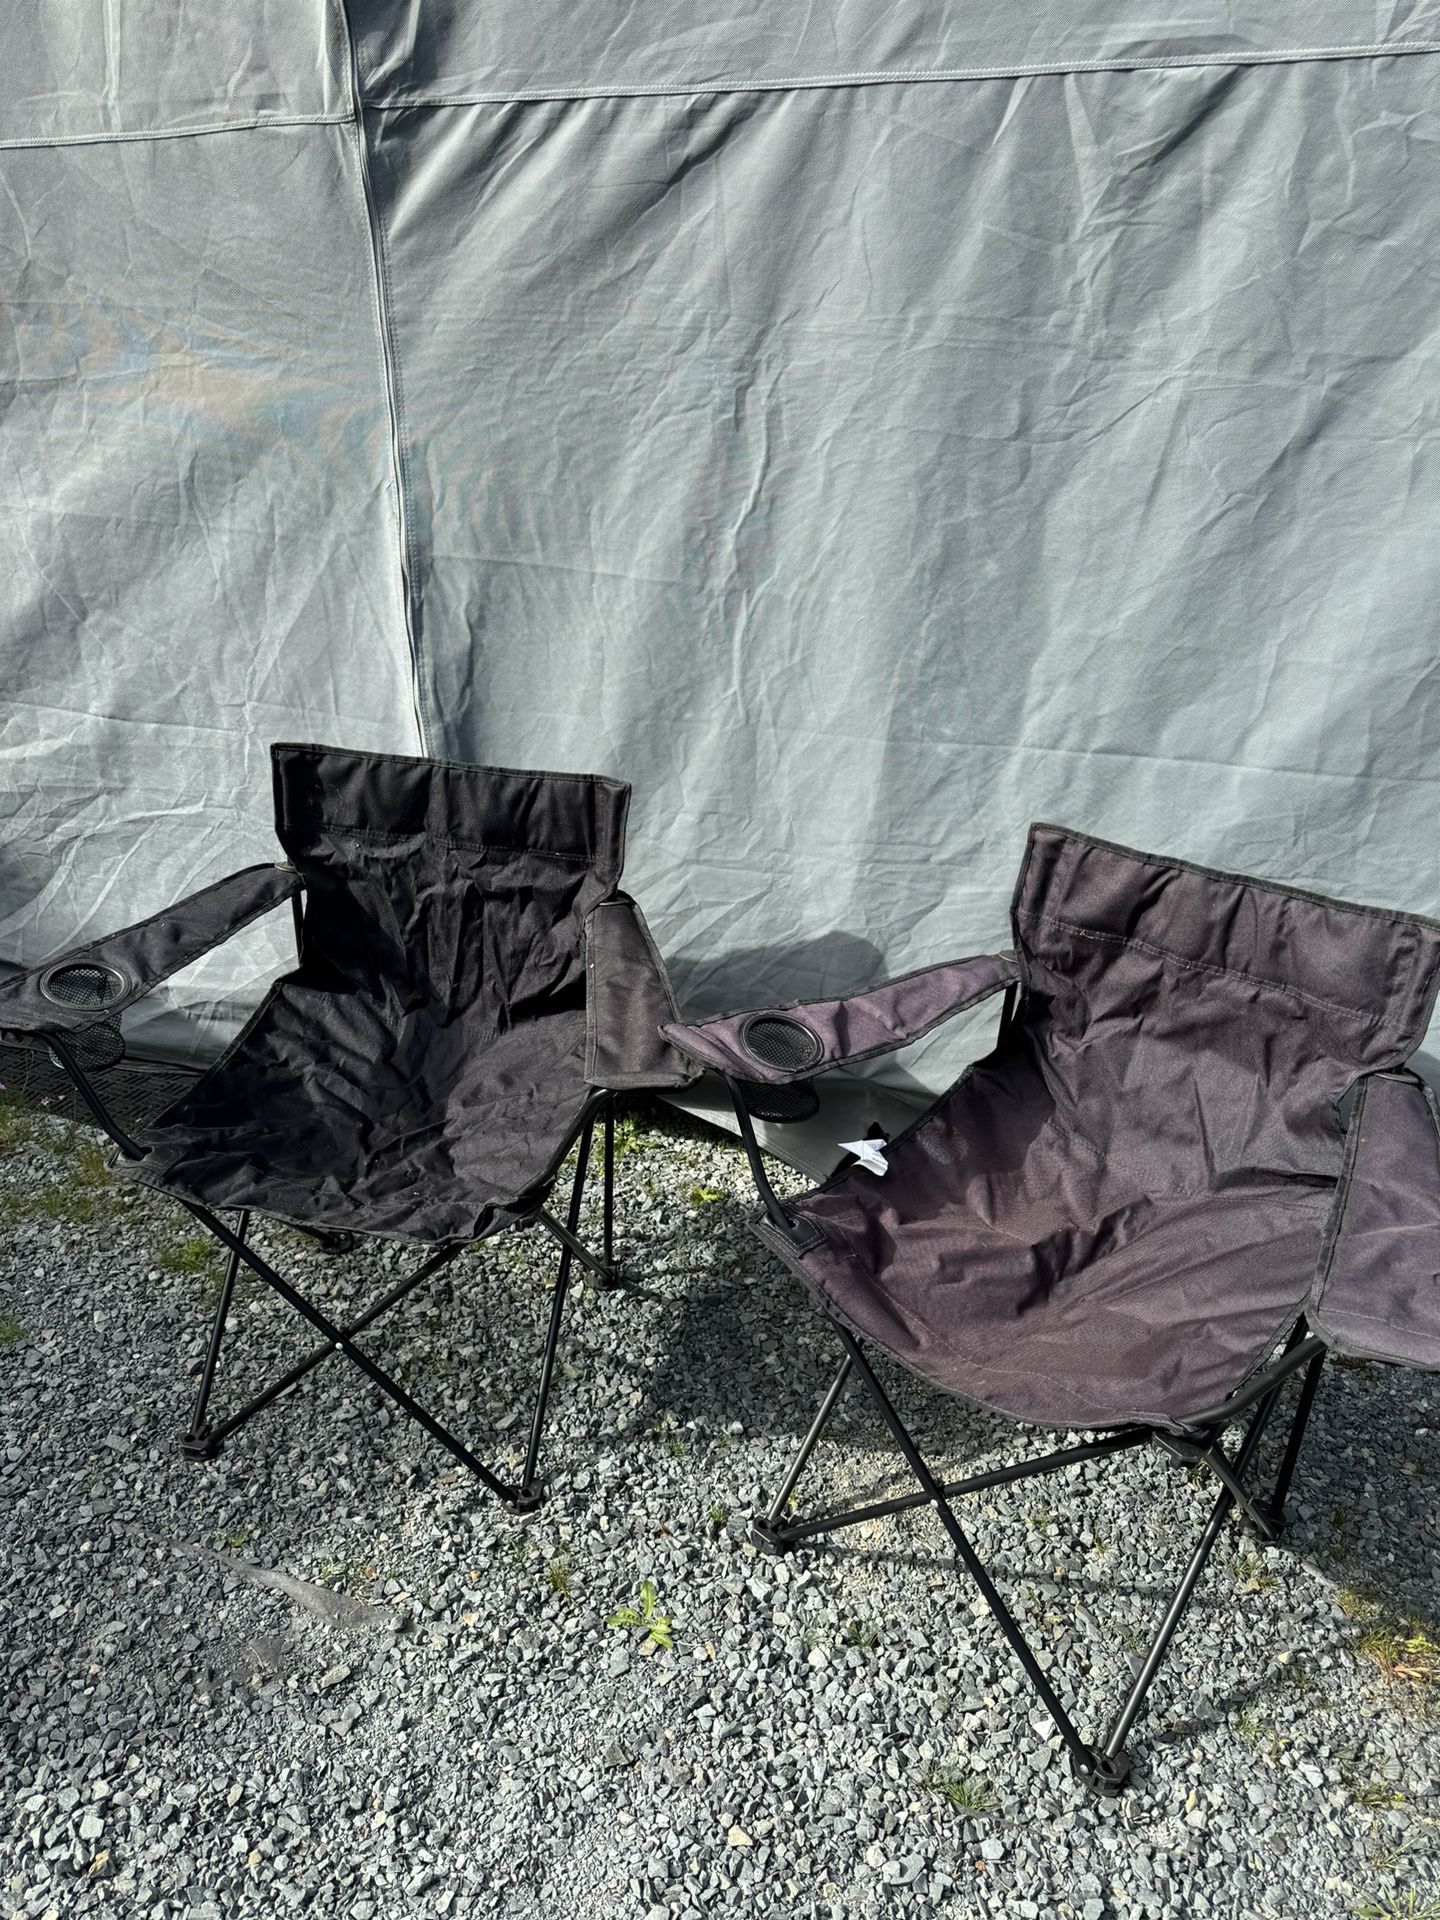 Camping Chairs